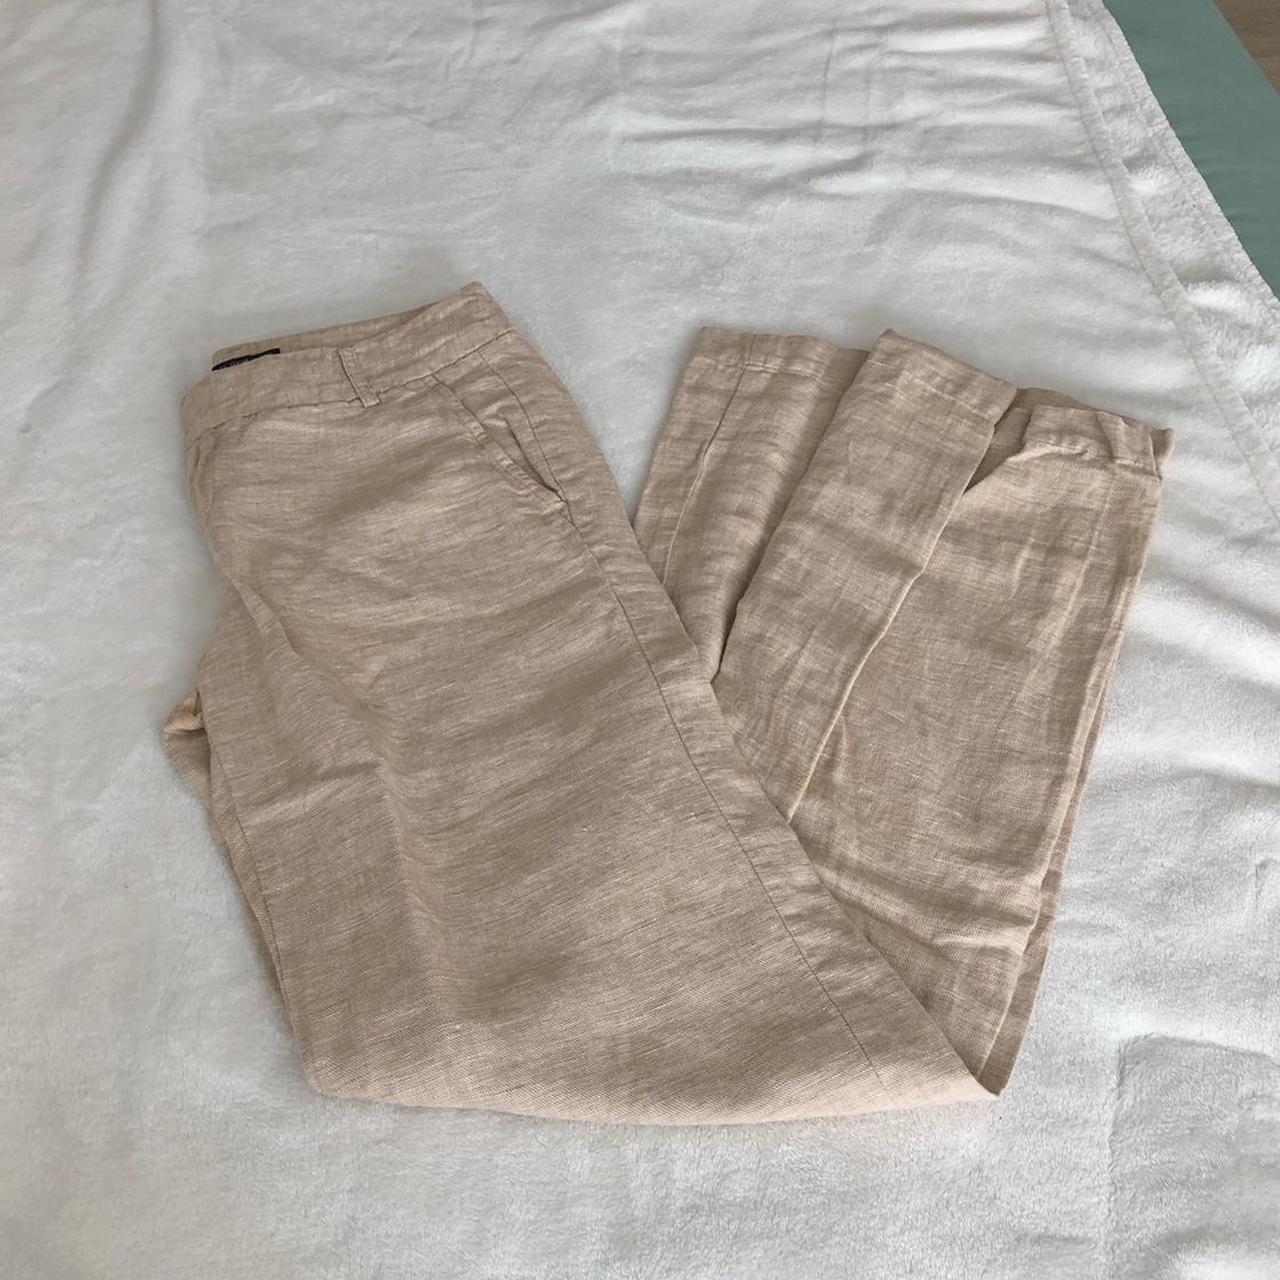 Low rise linen pants perfect for fall Waist: 13in... - Depop